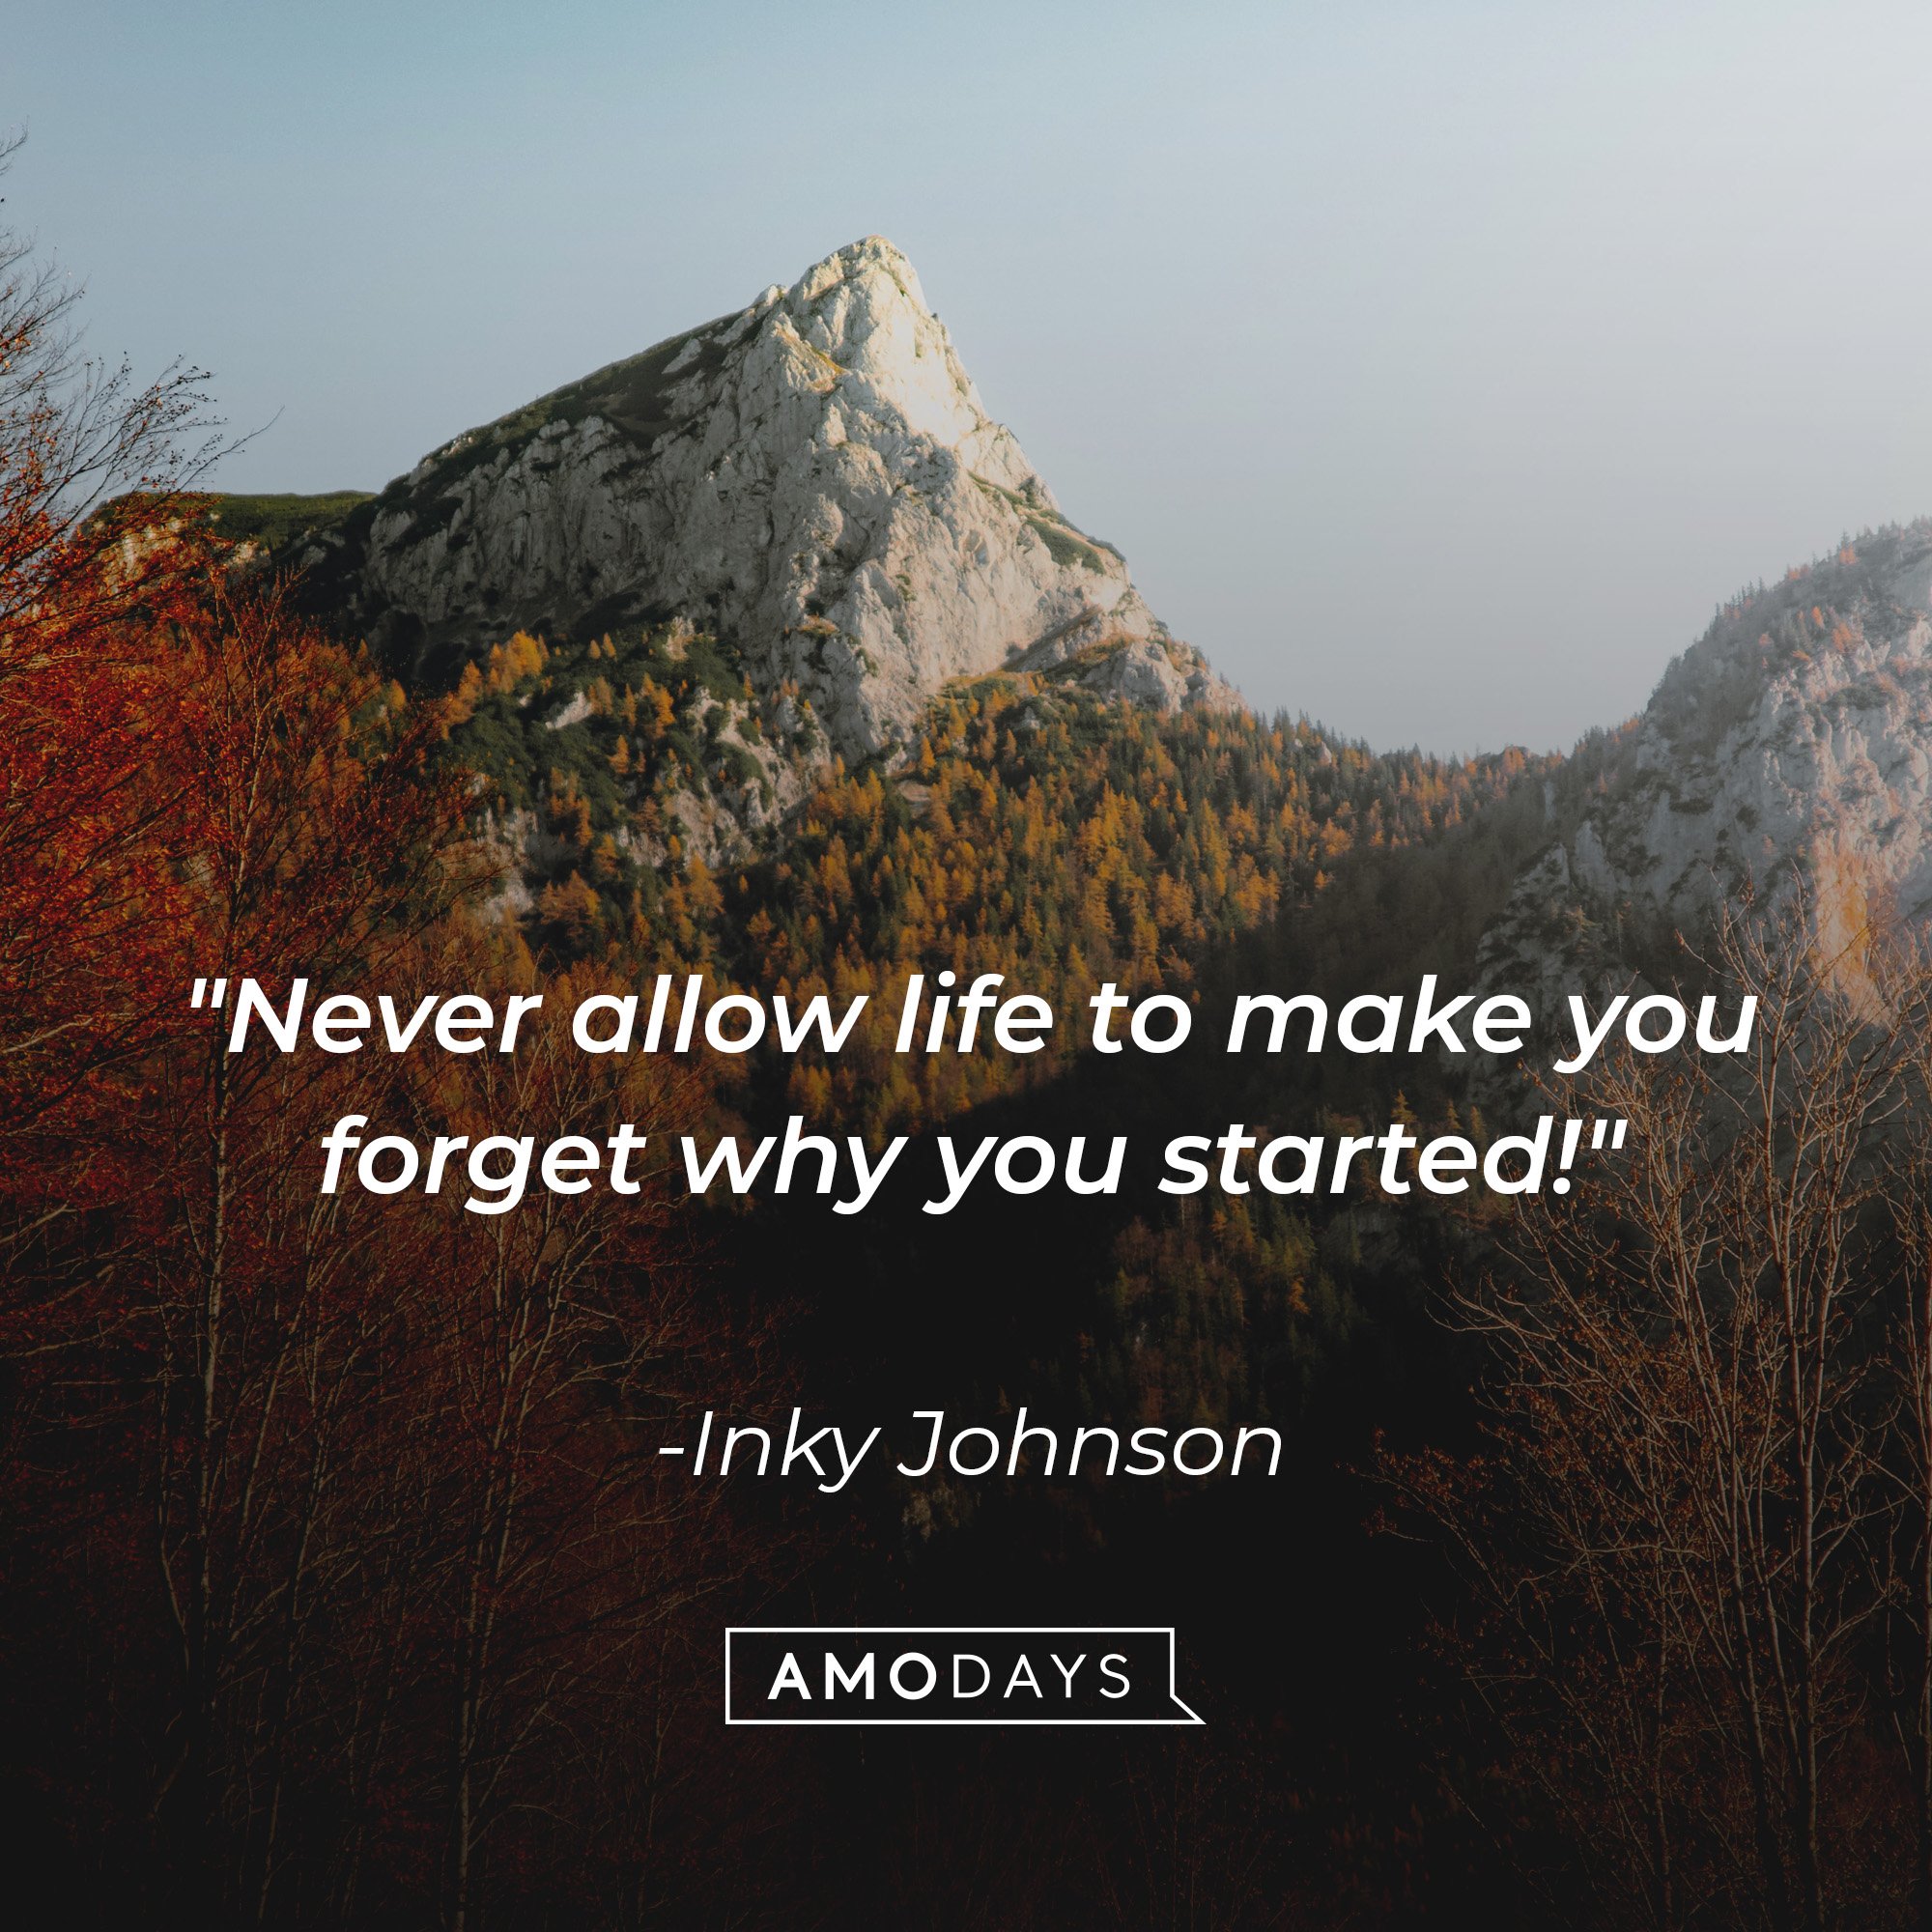 Inky Johnson's quote: "Never allow life to make you forget why you started!" | Image: AmoDays